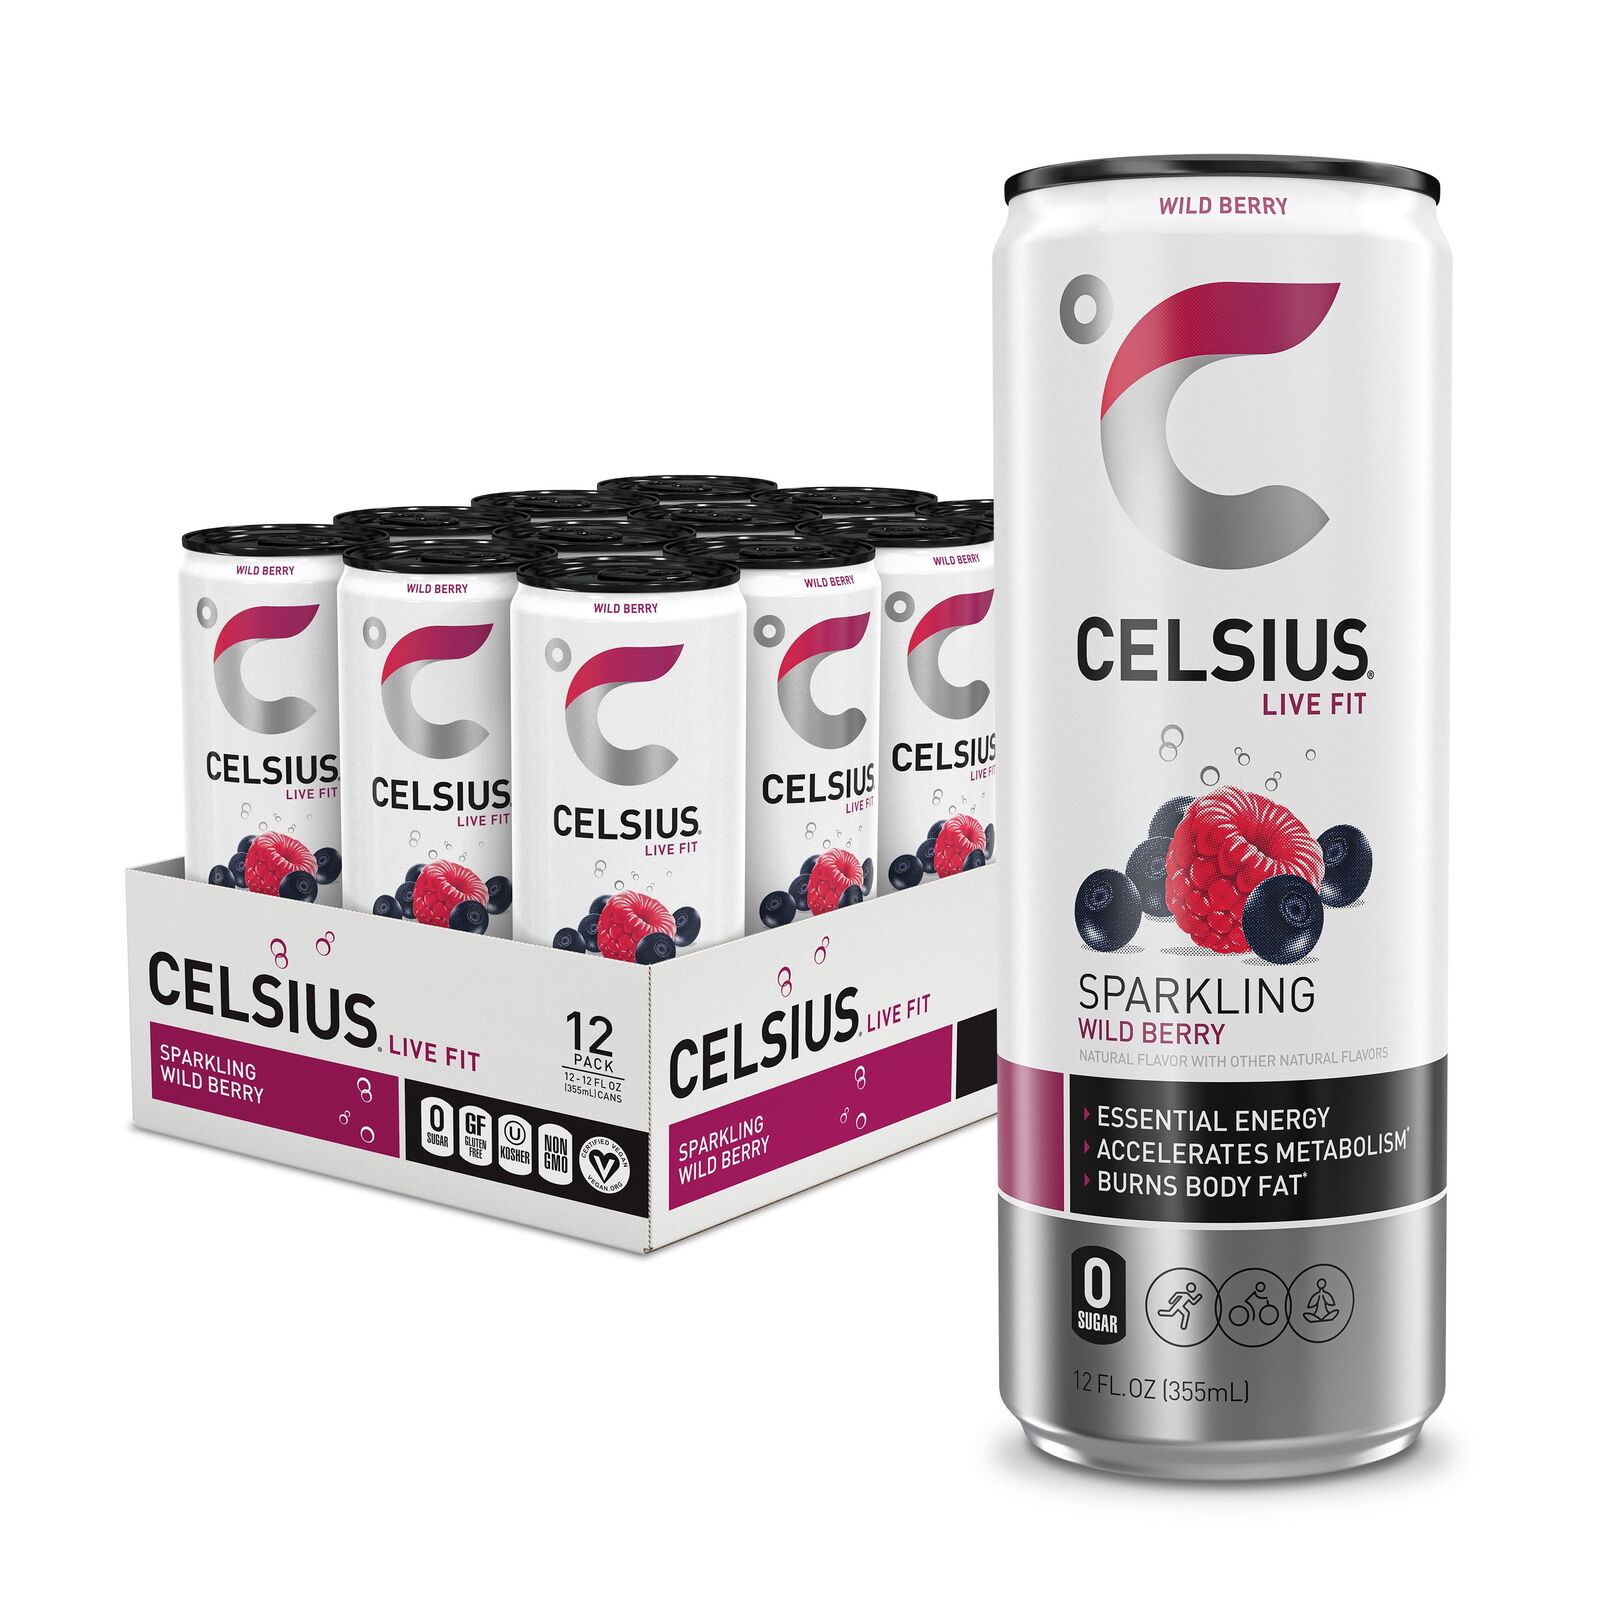 CELSIUS Sparkling Wild Berry, Functional Essential Energy Drink 12 fl oz Can